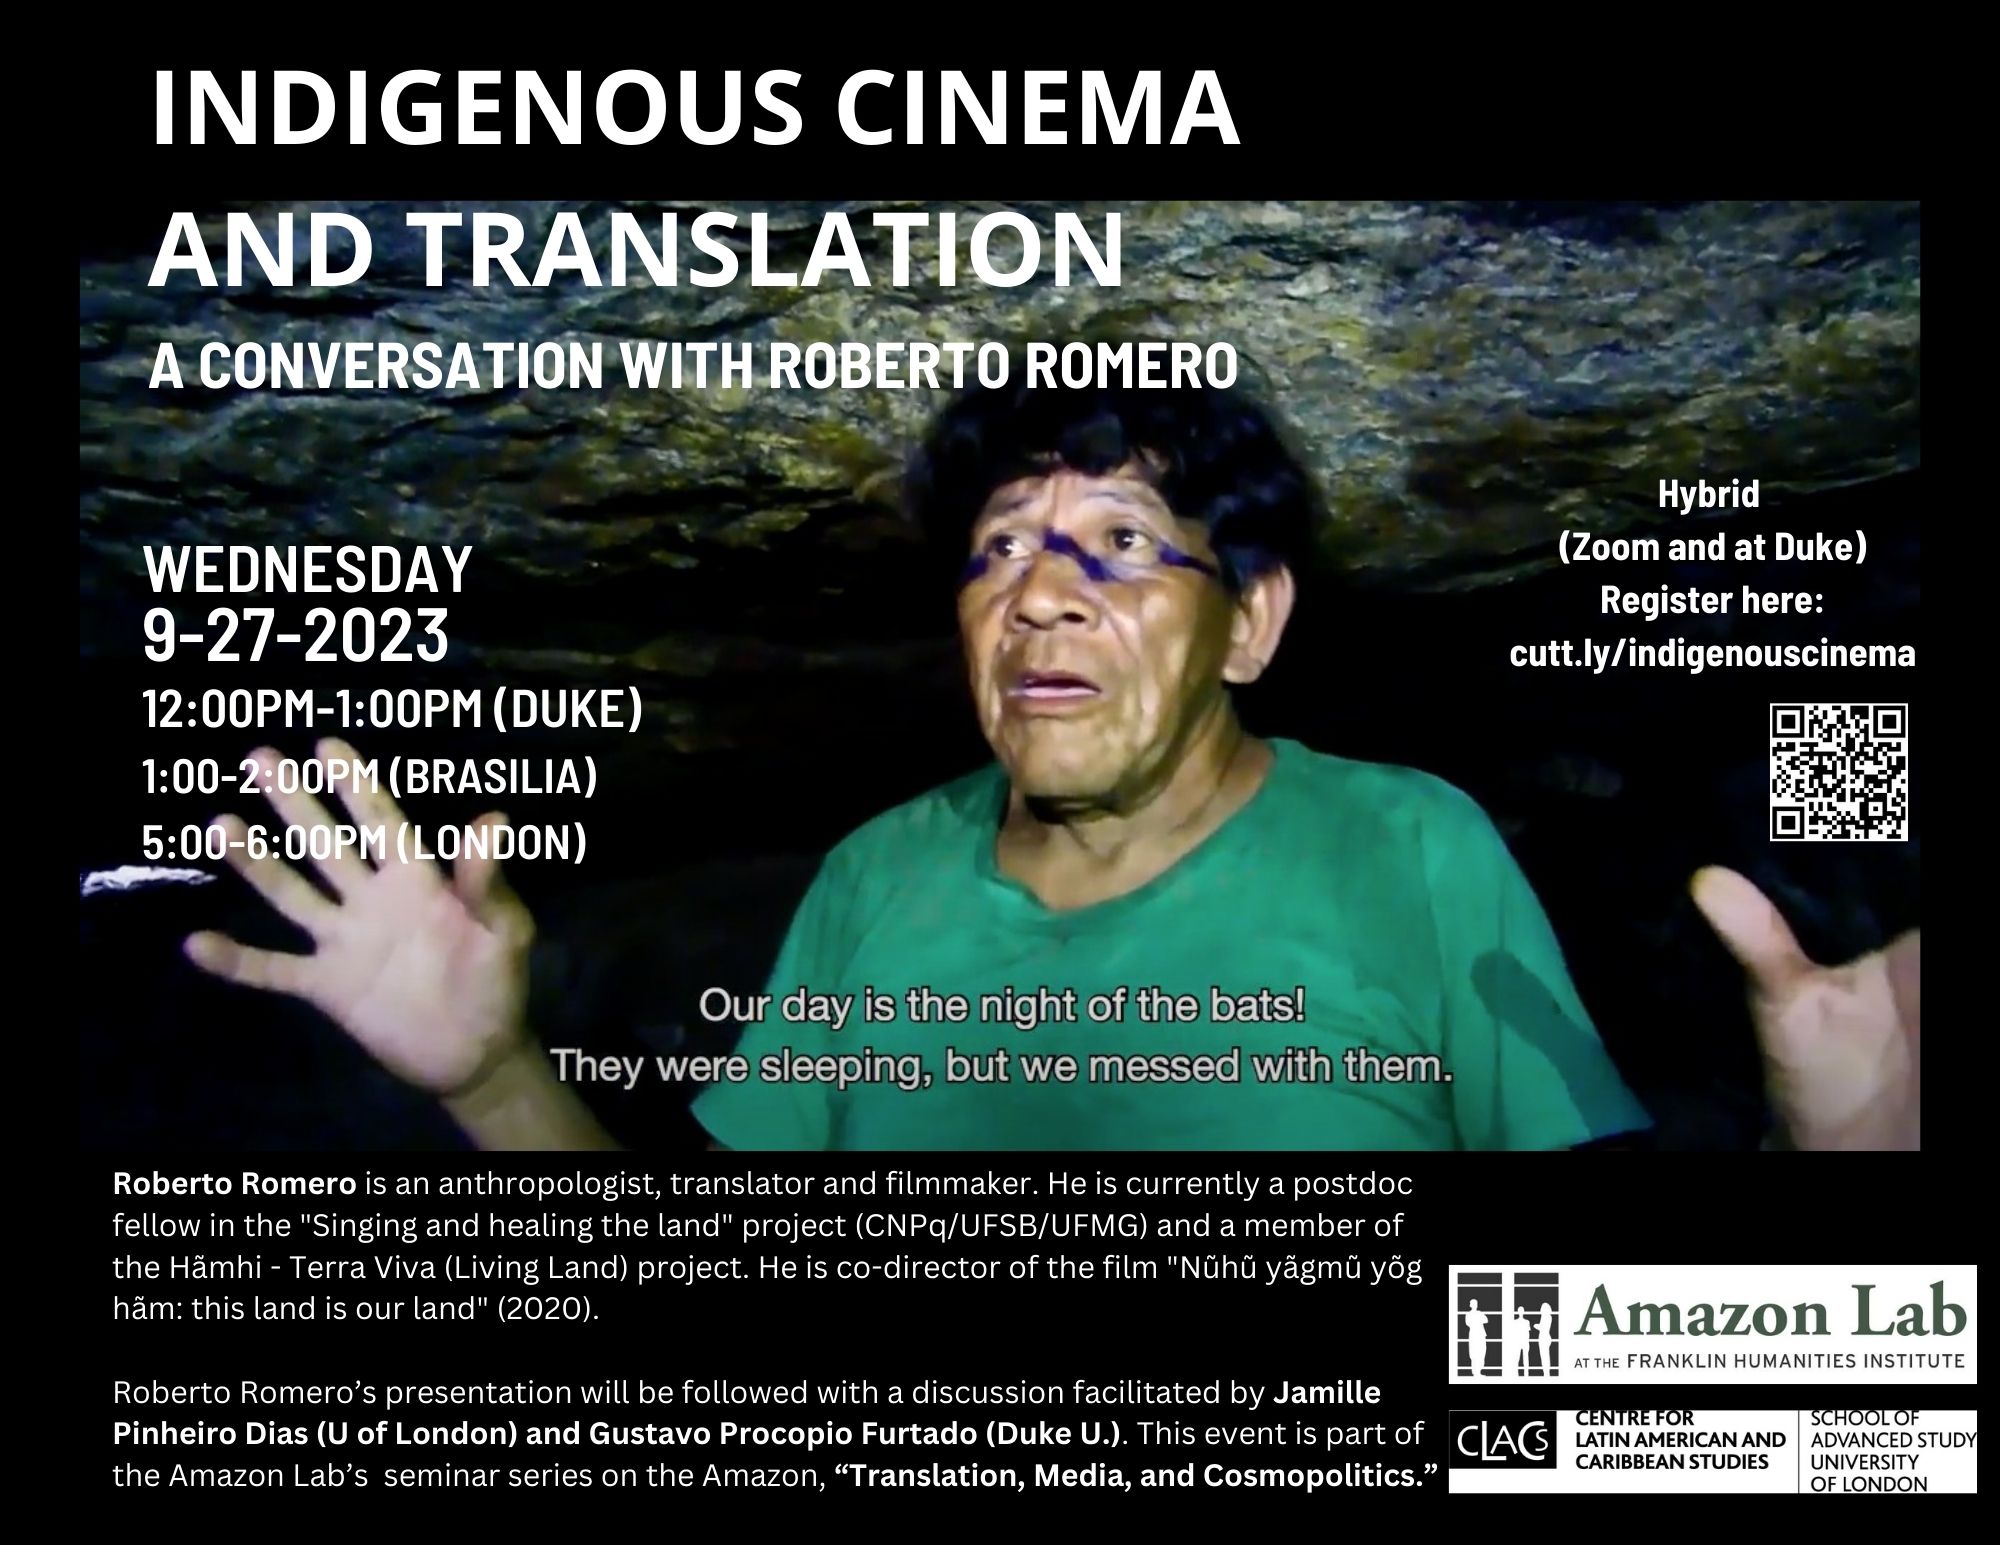 image from a film showing an indigenous Amazonian man with black hair and brown skin, holding his hands apart and up, wearing a green t-shirt, talking, with the caption "Our day is the night of the bats! They were sleeping, but we messed with them." - Event text overlaid on top of the photo.